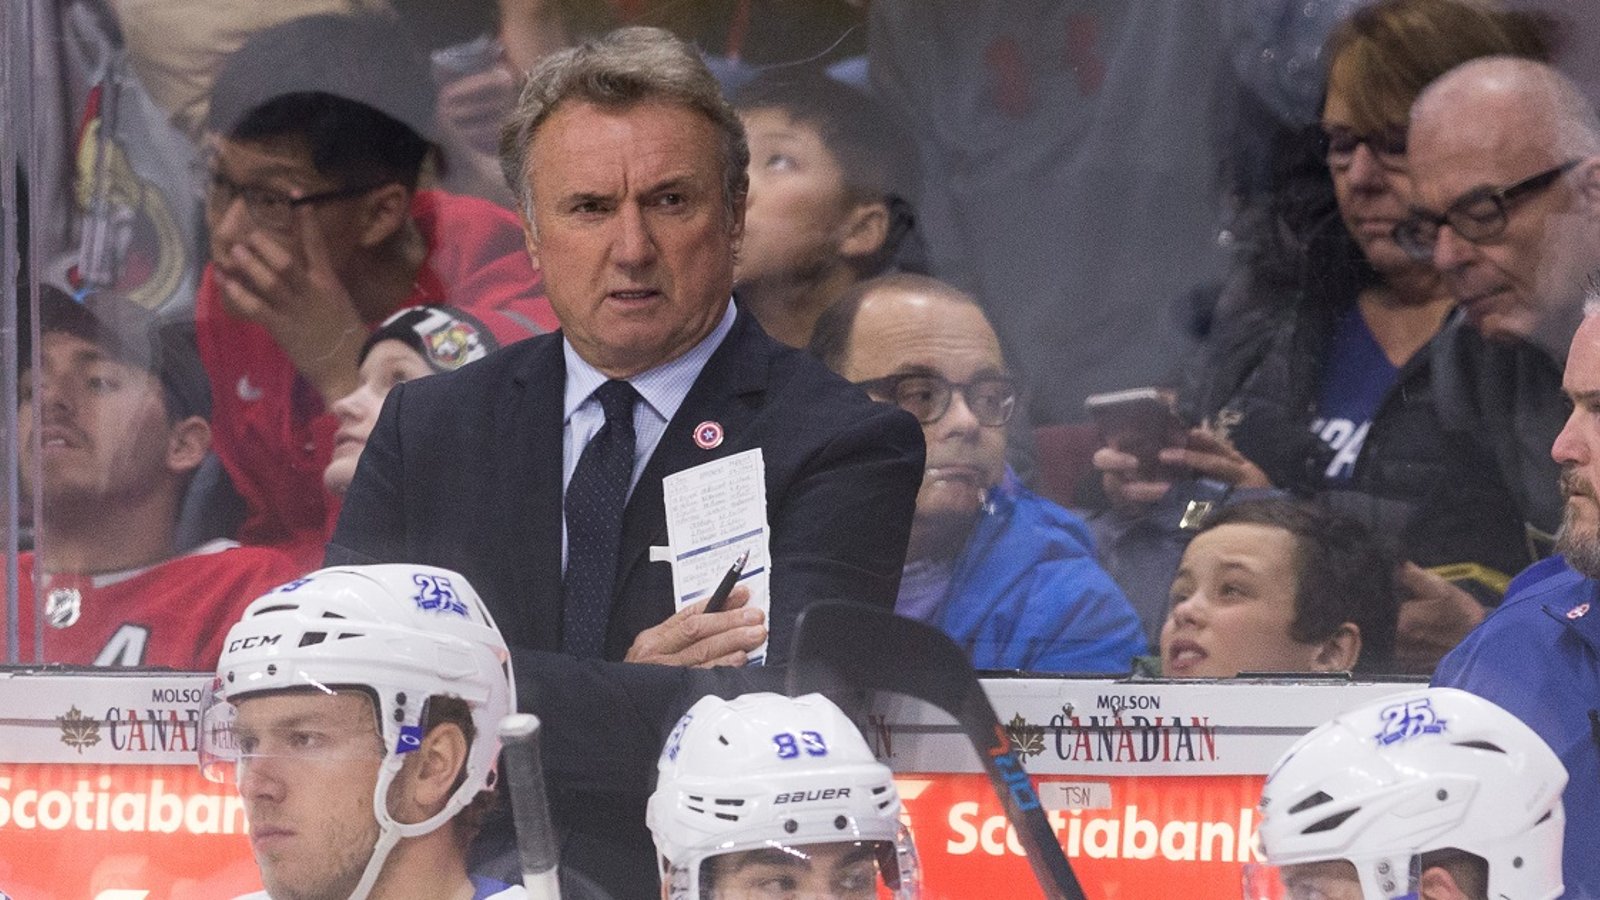 Report: Rick Bowness labels 3 players “unfit to play” for Game 1.